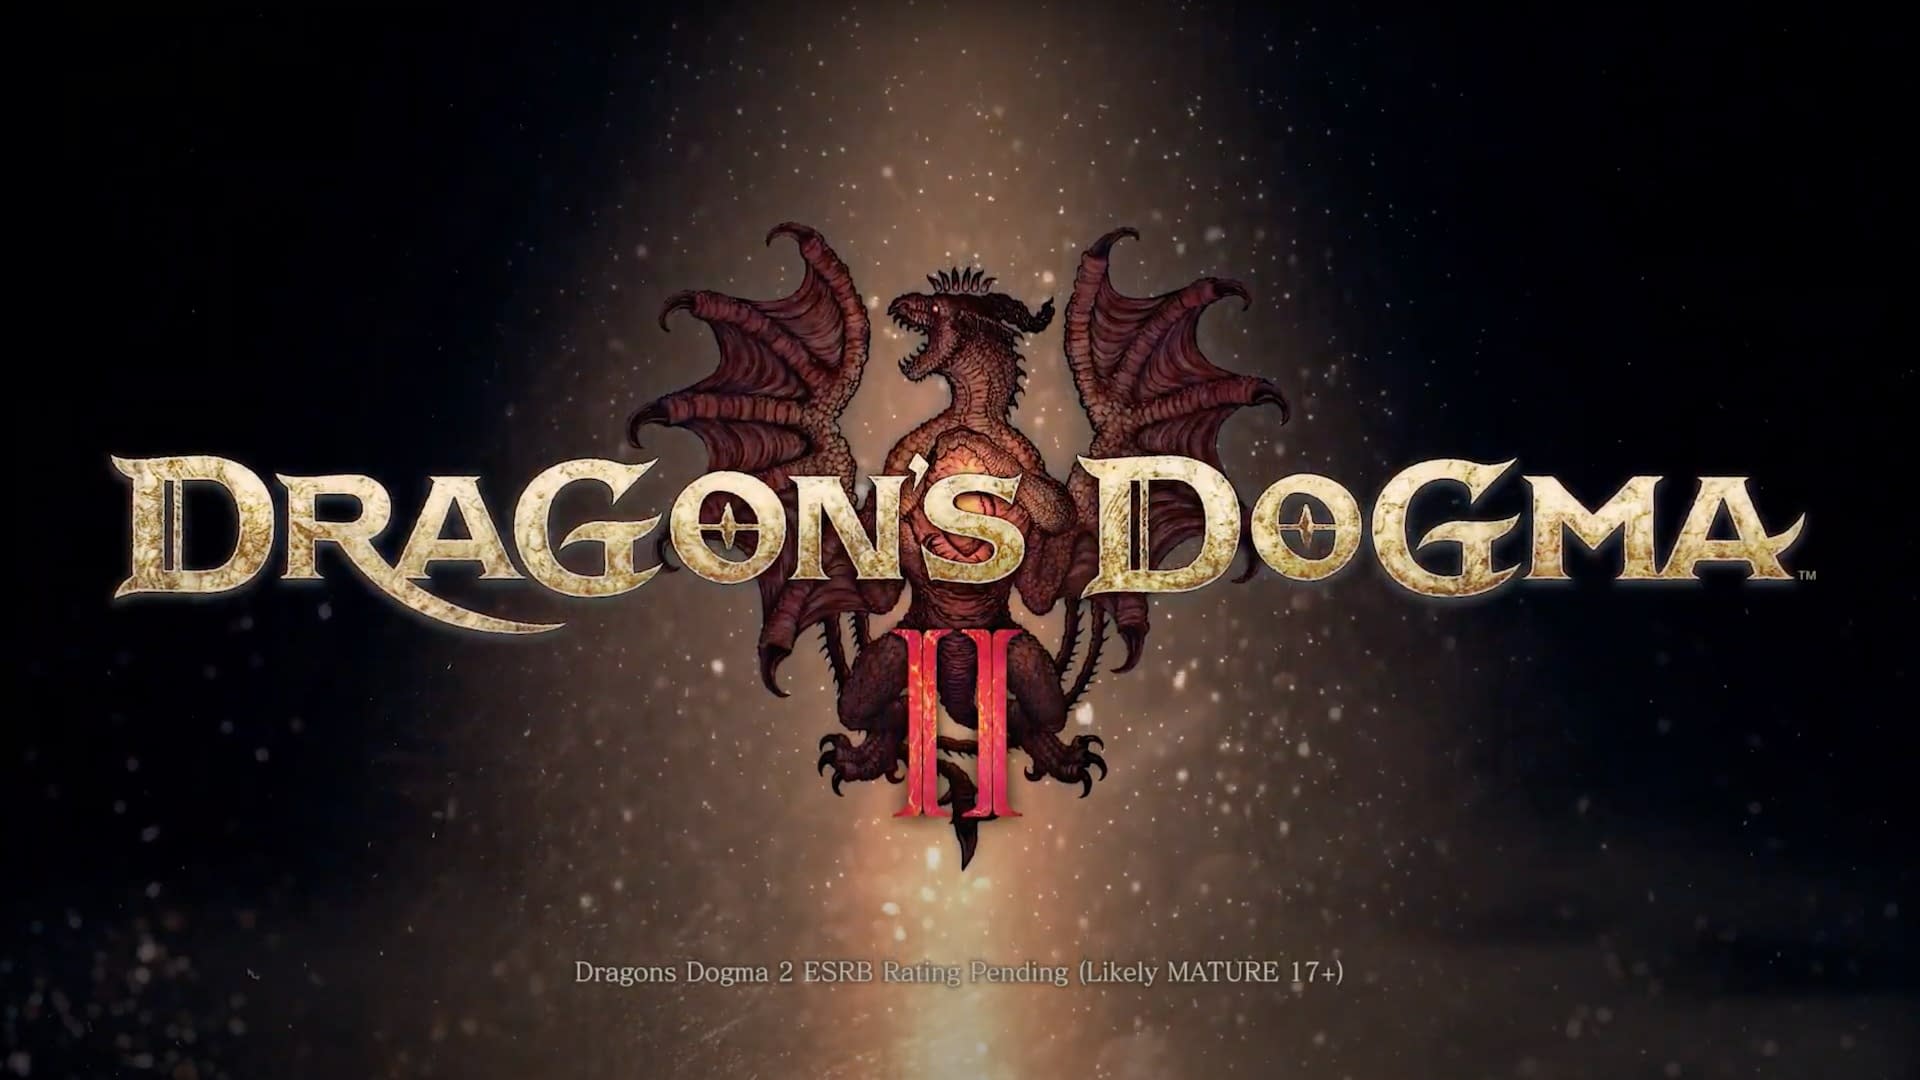 Dragon’s Dogma 2 Released Date This Night Event Will be Announced!